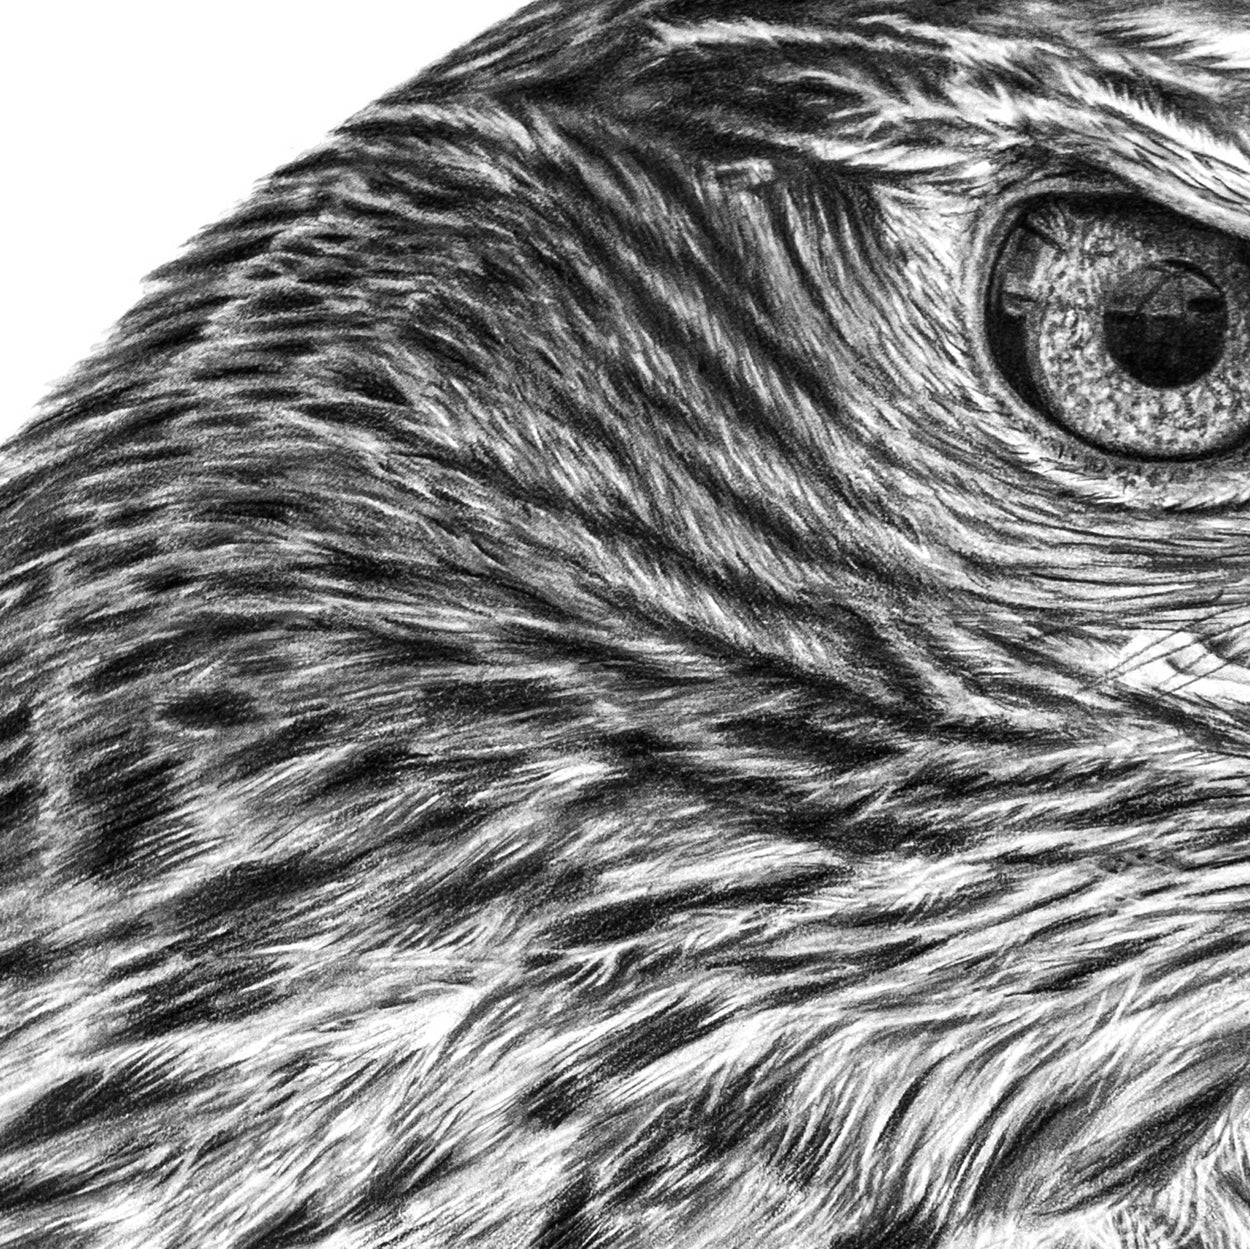 Close-up detail of a pencil drawing of a golden eagle's eye and head